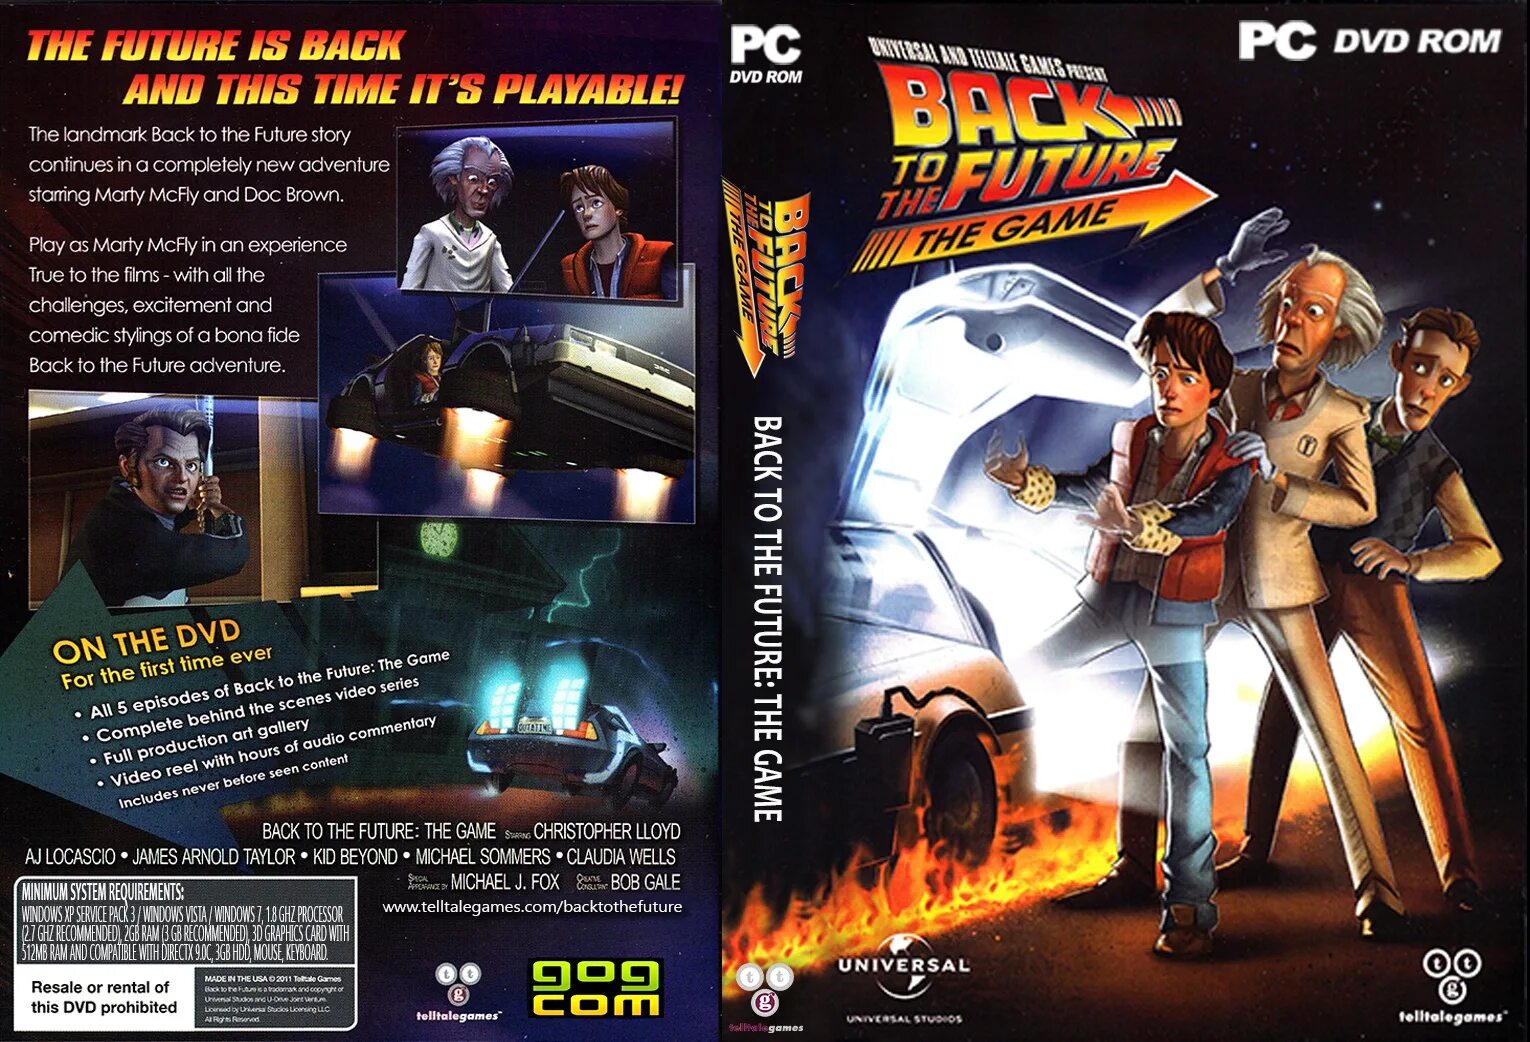 Back to the Future игра. Back to the Future the game обложка. Telltale back to the Future. Back to the Future (игра, 1989). Back to experiences